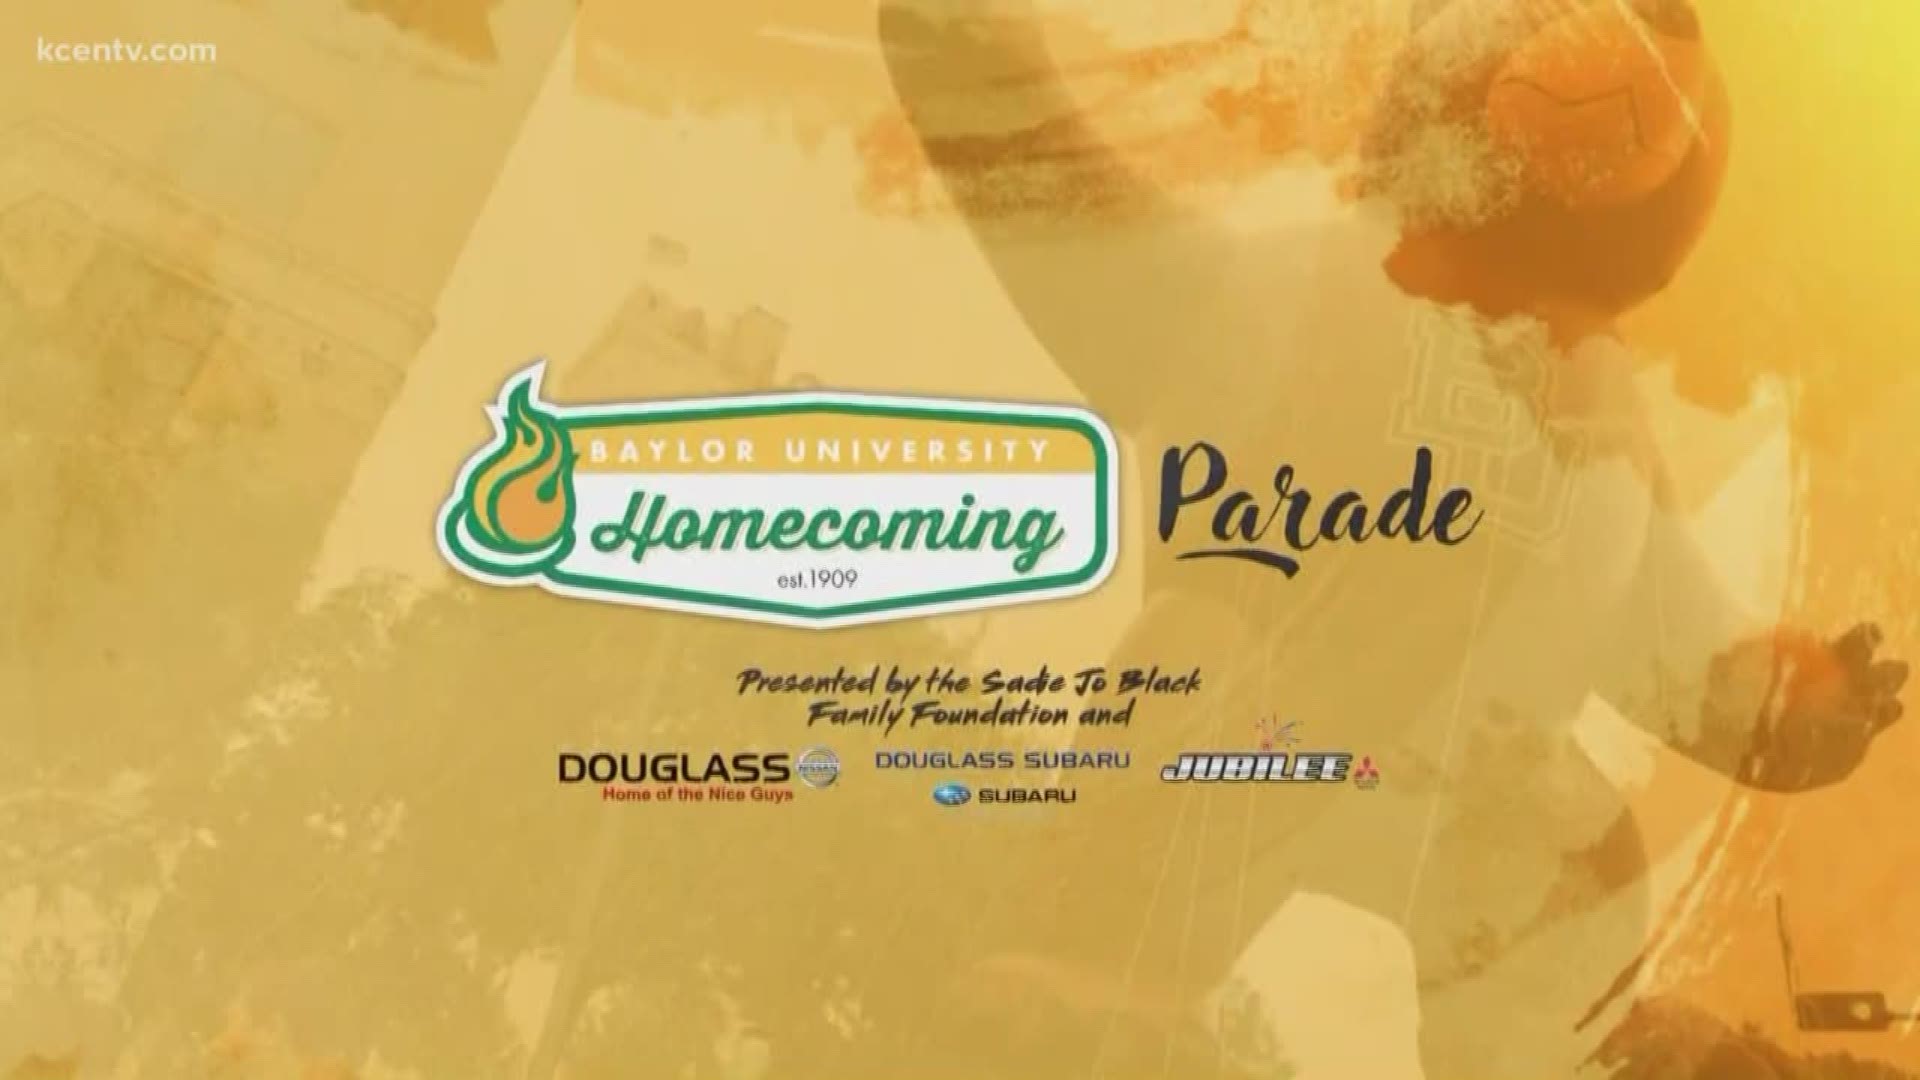 One of the oldest and largest collegiate homecoming parades in the nation marched through the streets of Waco.